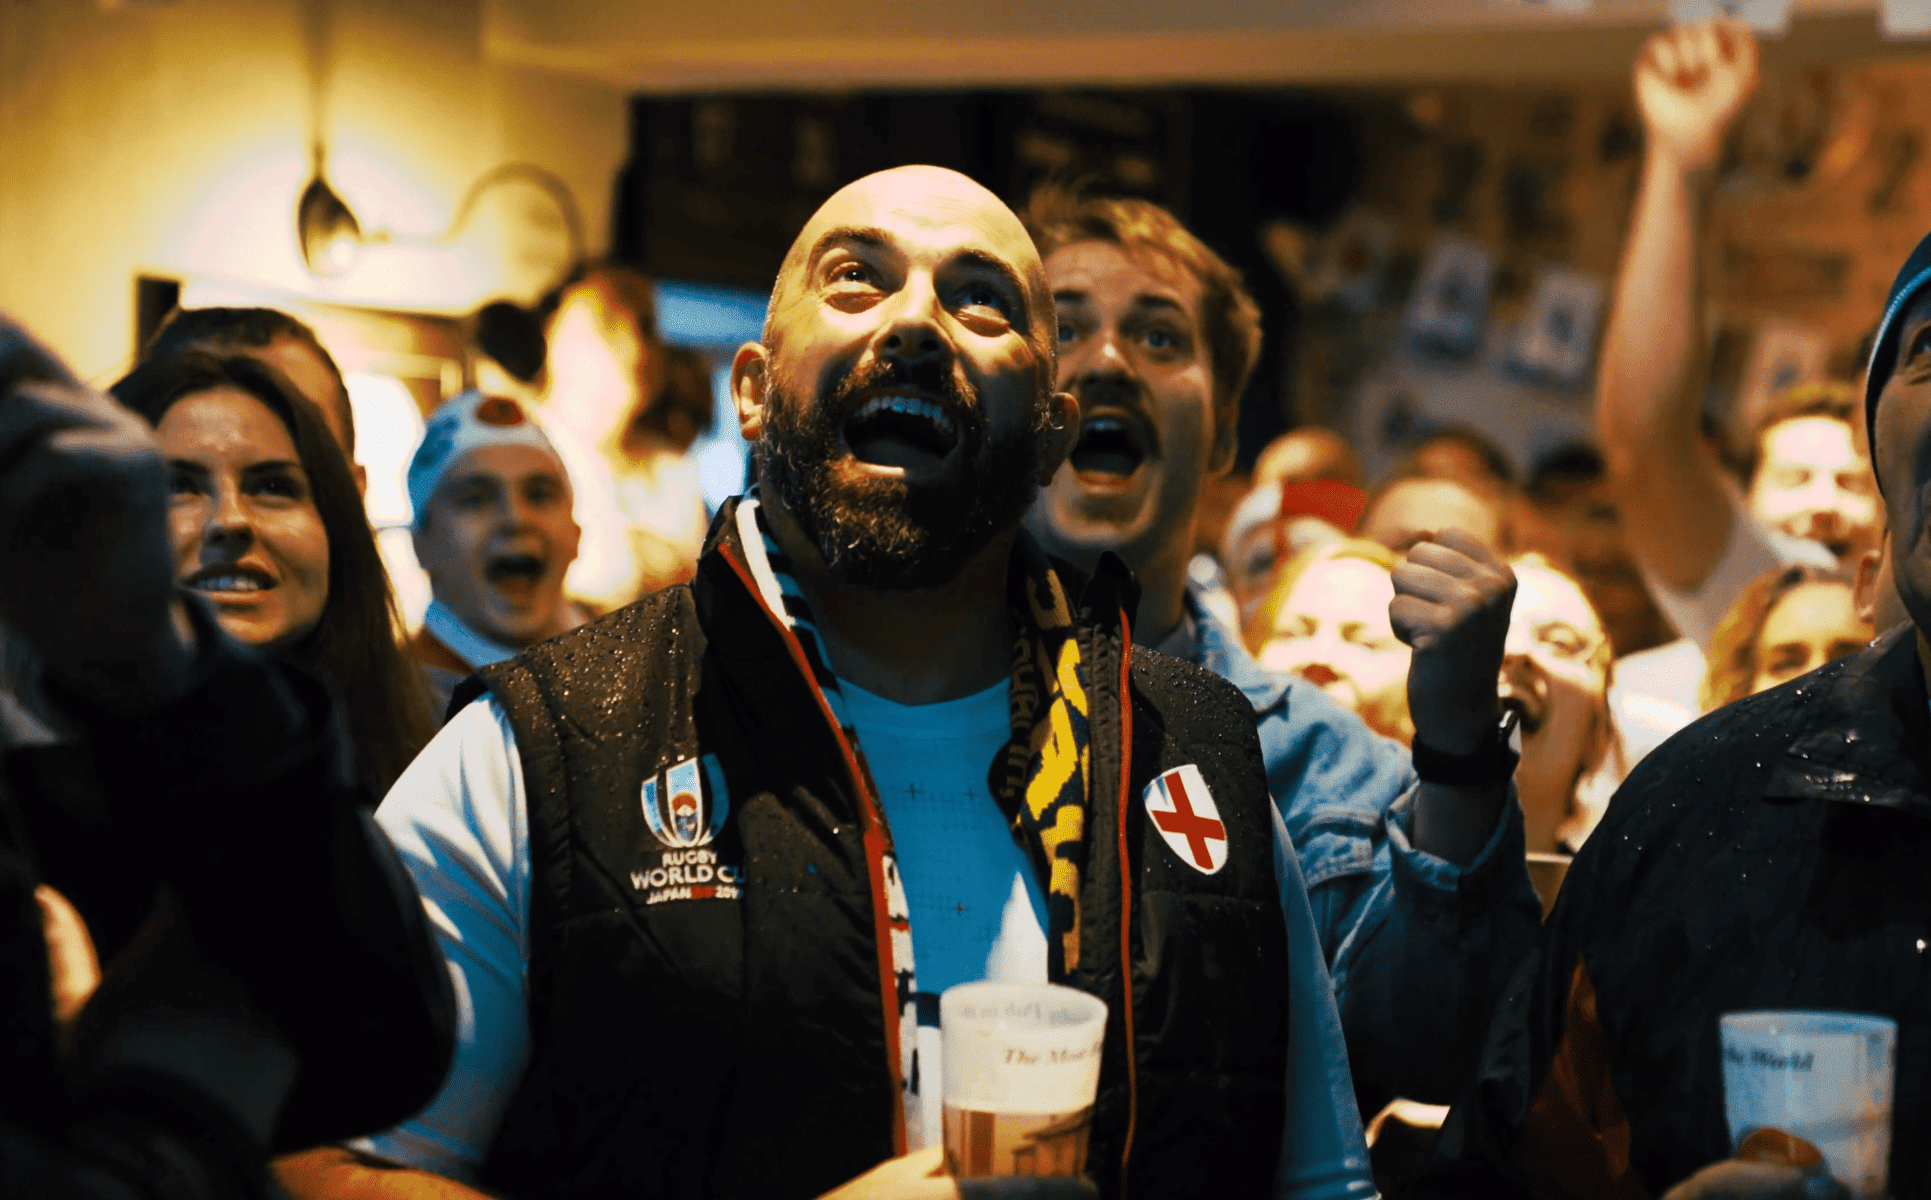 the six nations fans